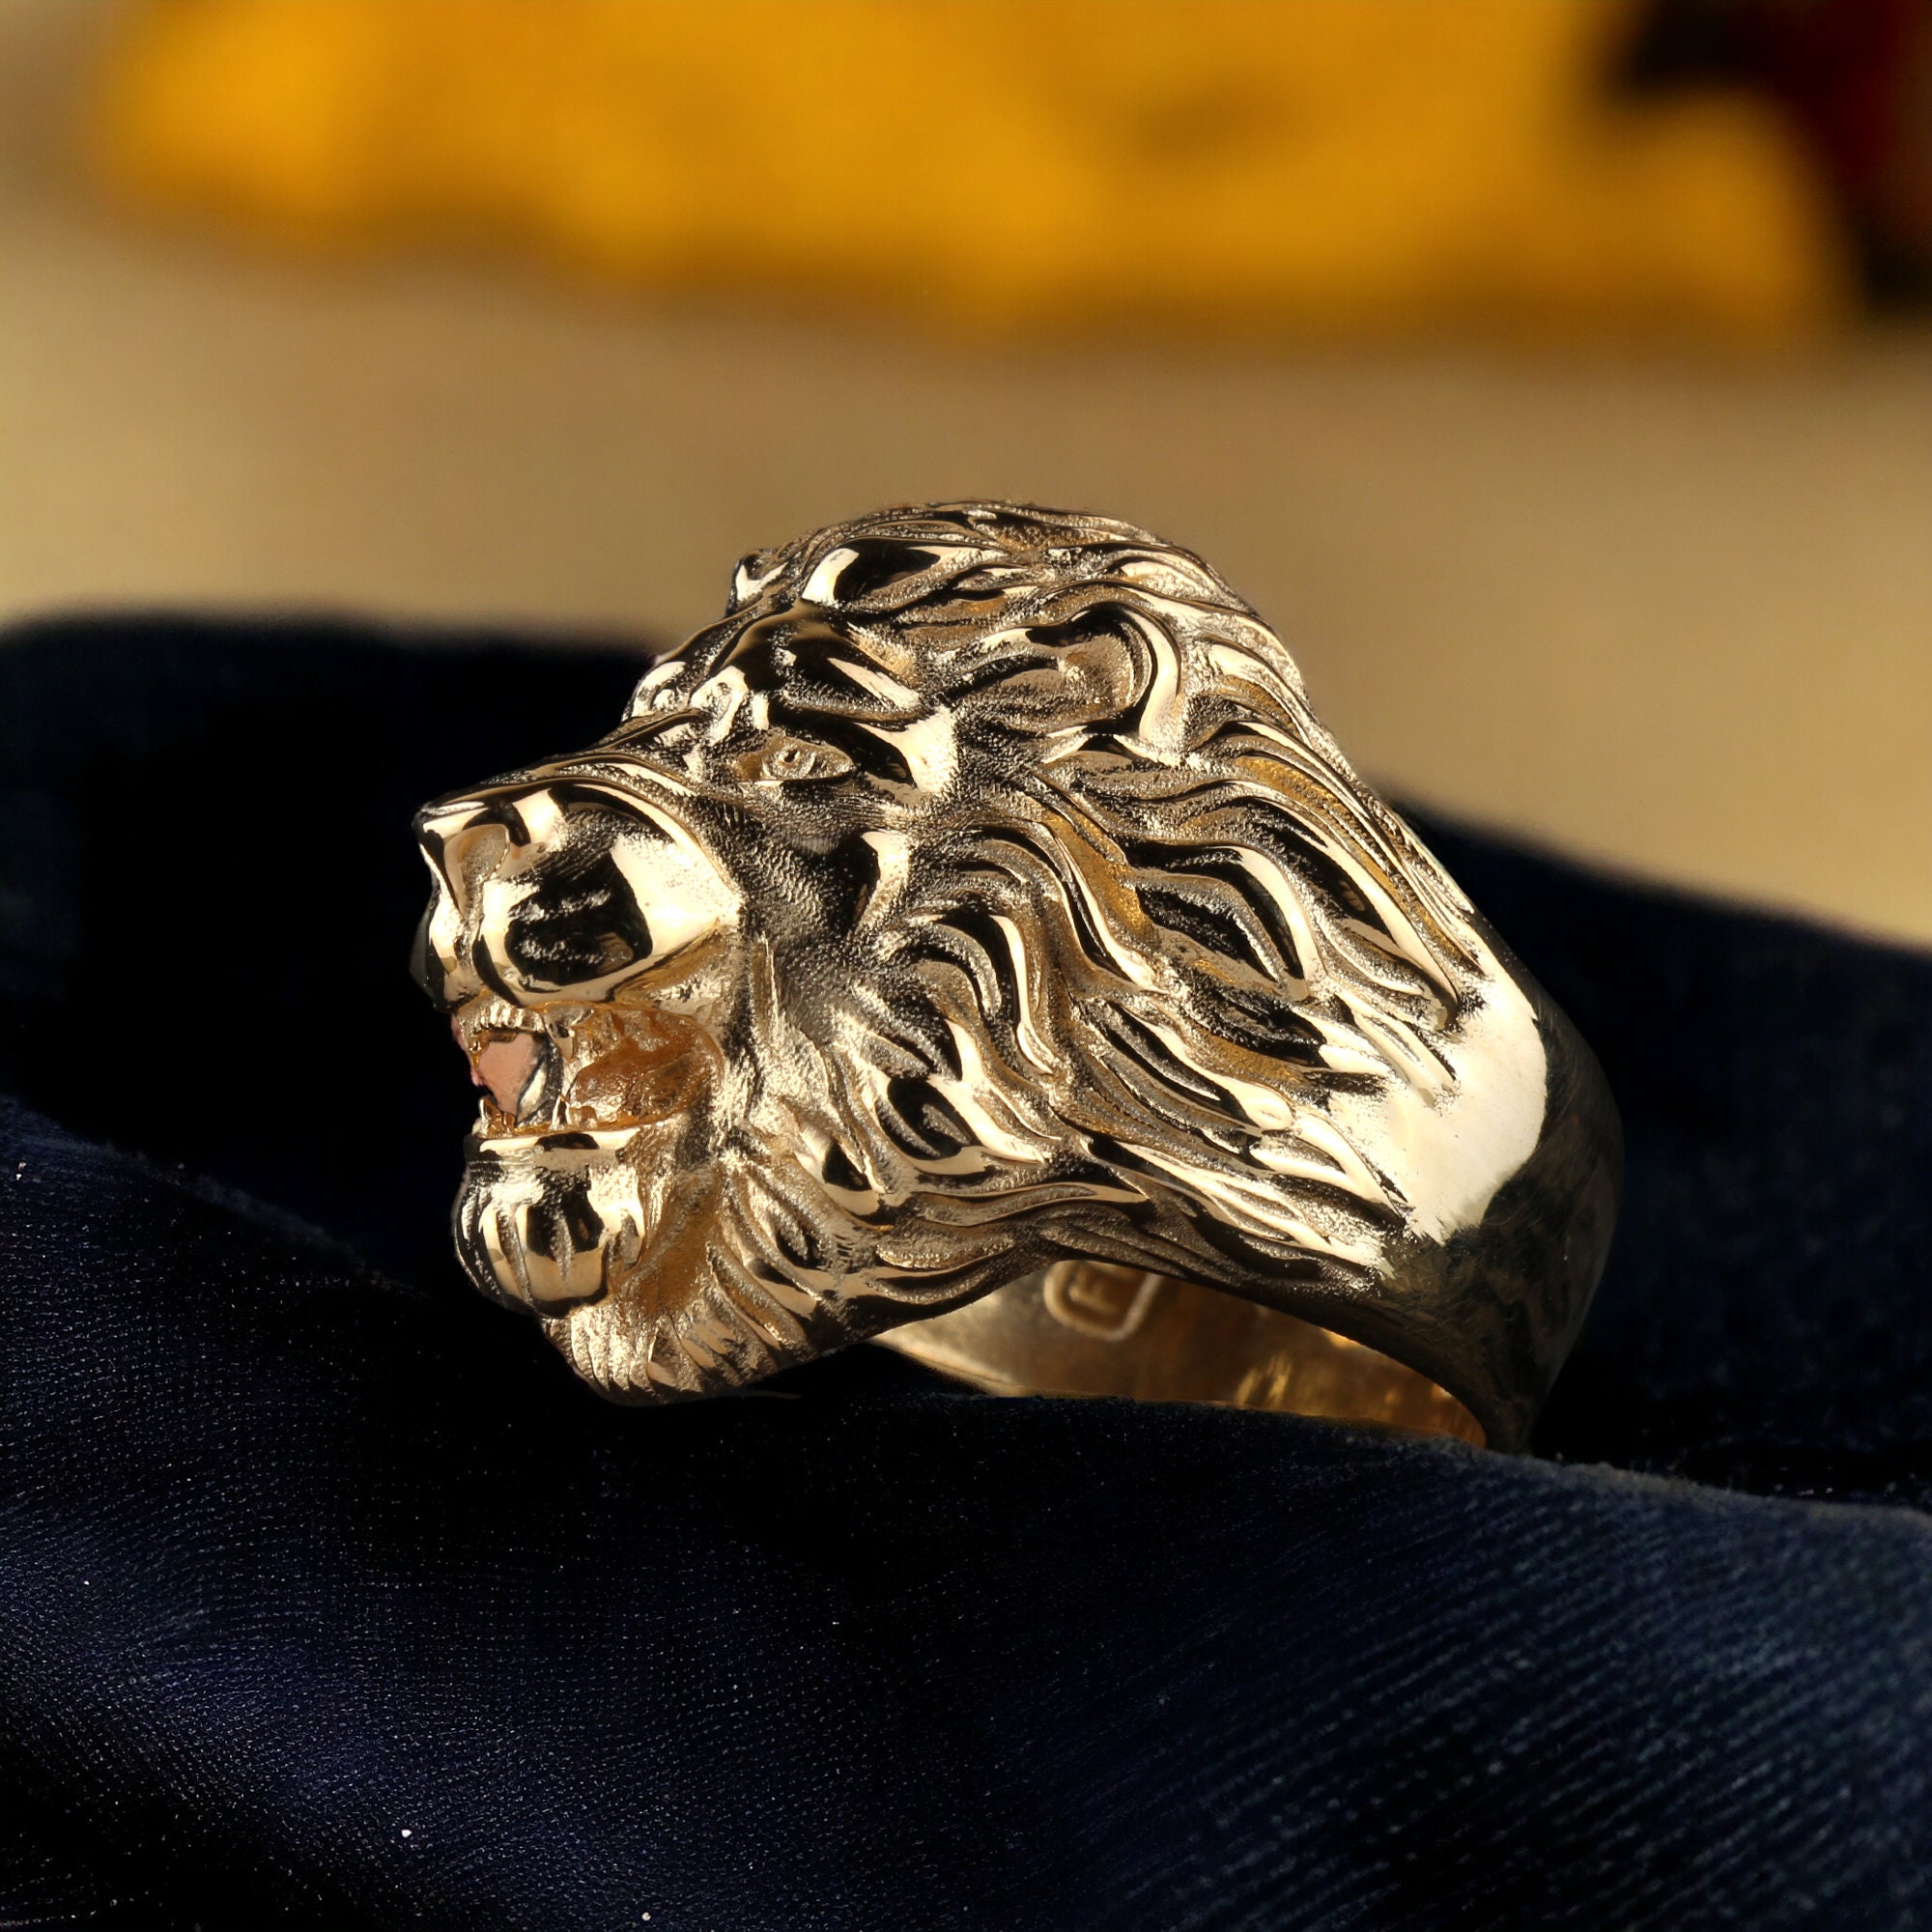 Buy Solid Real 24K Gold Lion Ring, Lion Ring for Men, Yellow Gold  Handcarved Jewelry Size 5 11 Online in India - Etsy